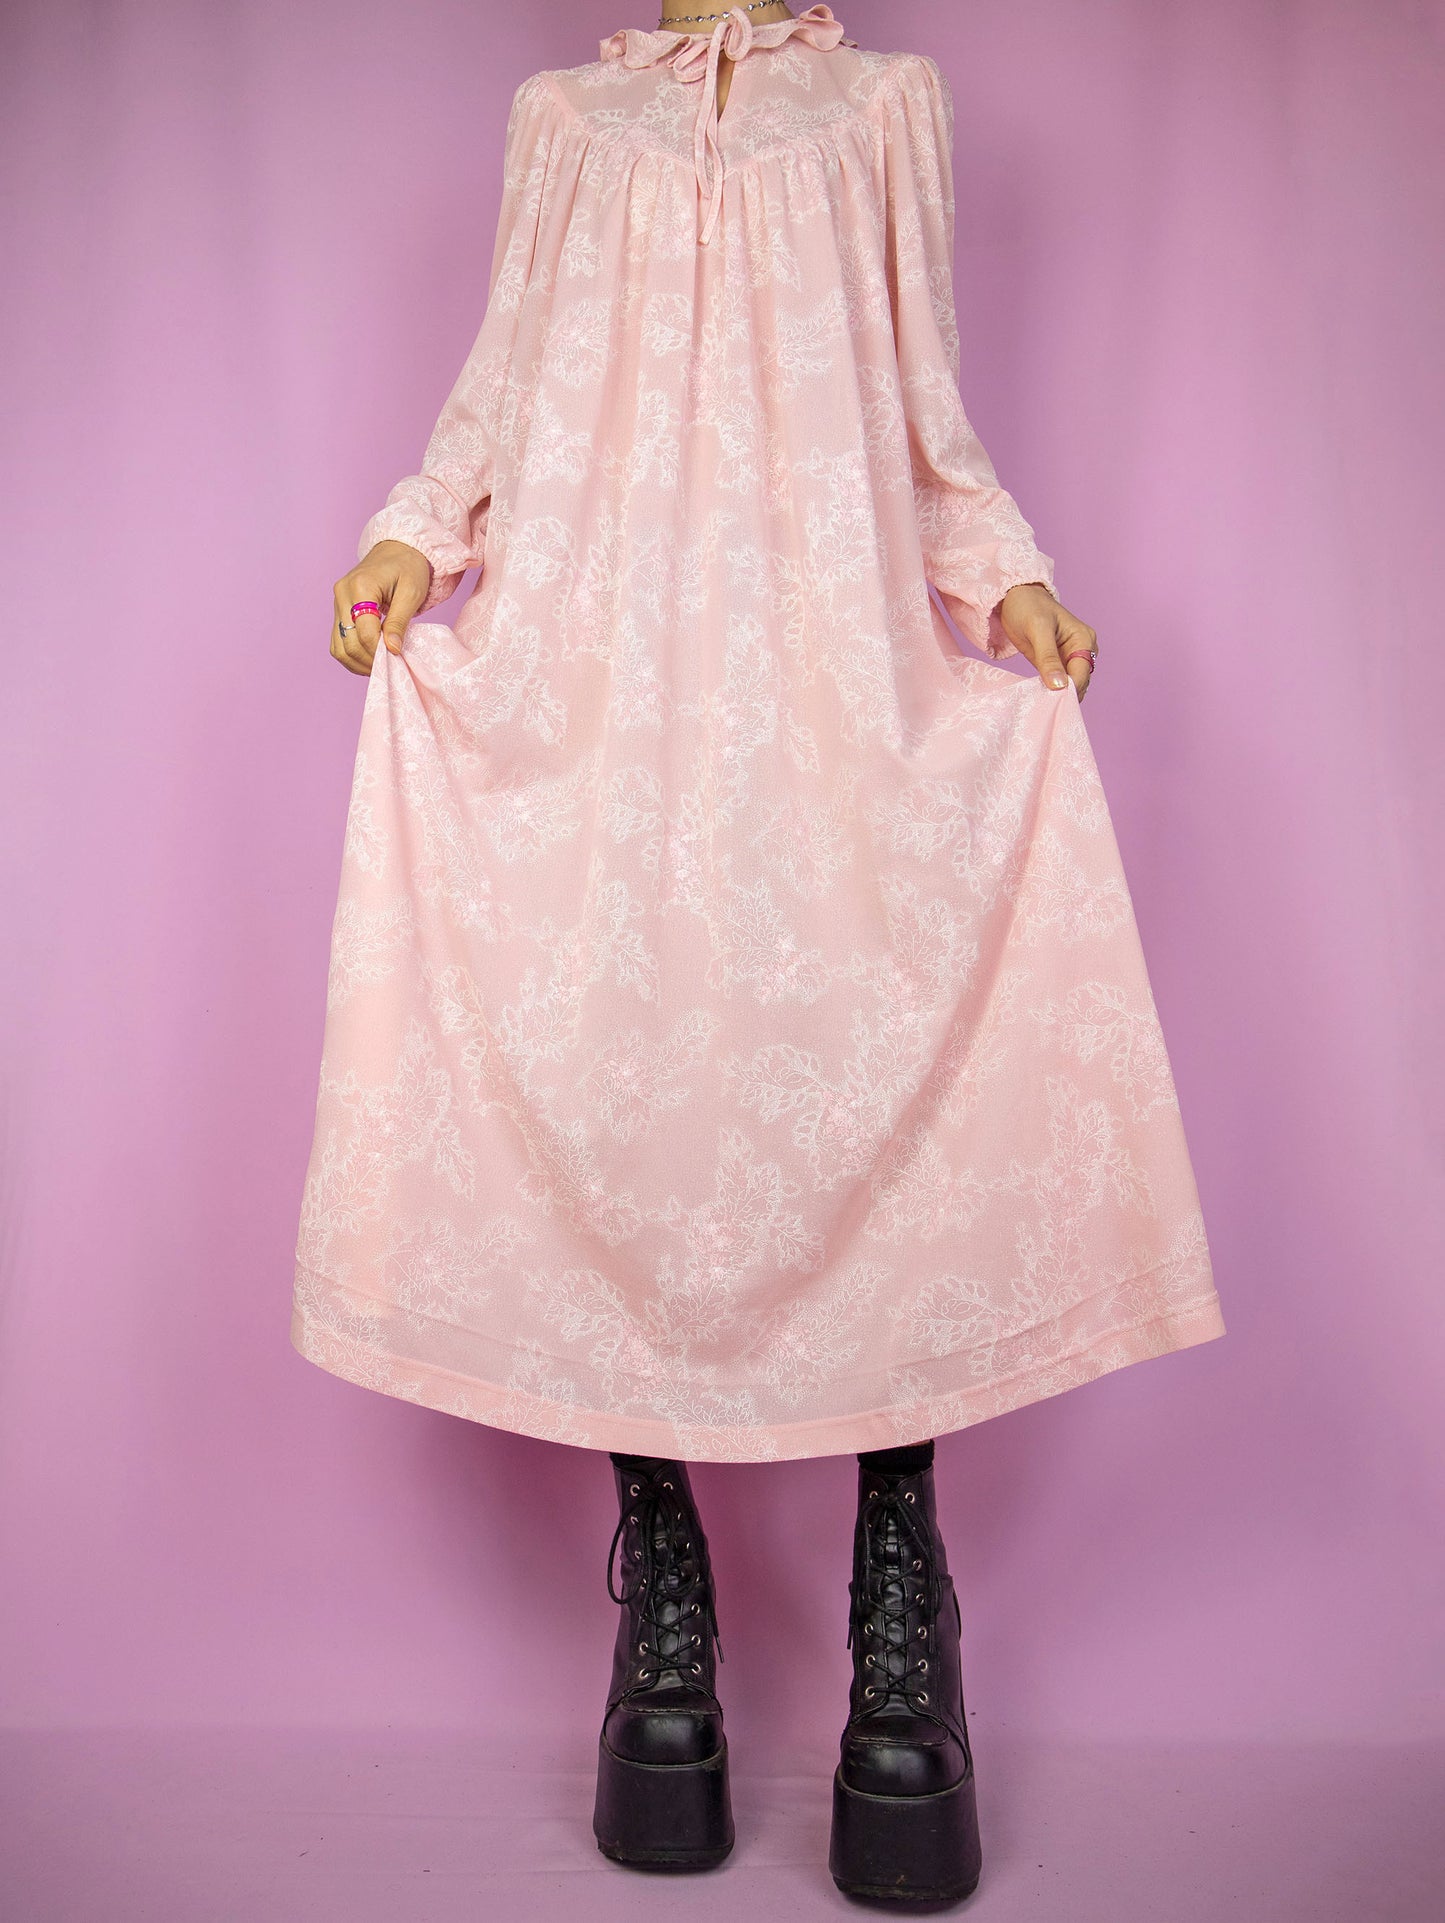 The Vintage 90s Pink Nightgown Dress is a pastel pink floral long sleeve midi dress with a tied-up front ruffle neckline. Lovely romantic sleepwear 1990s night dress.